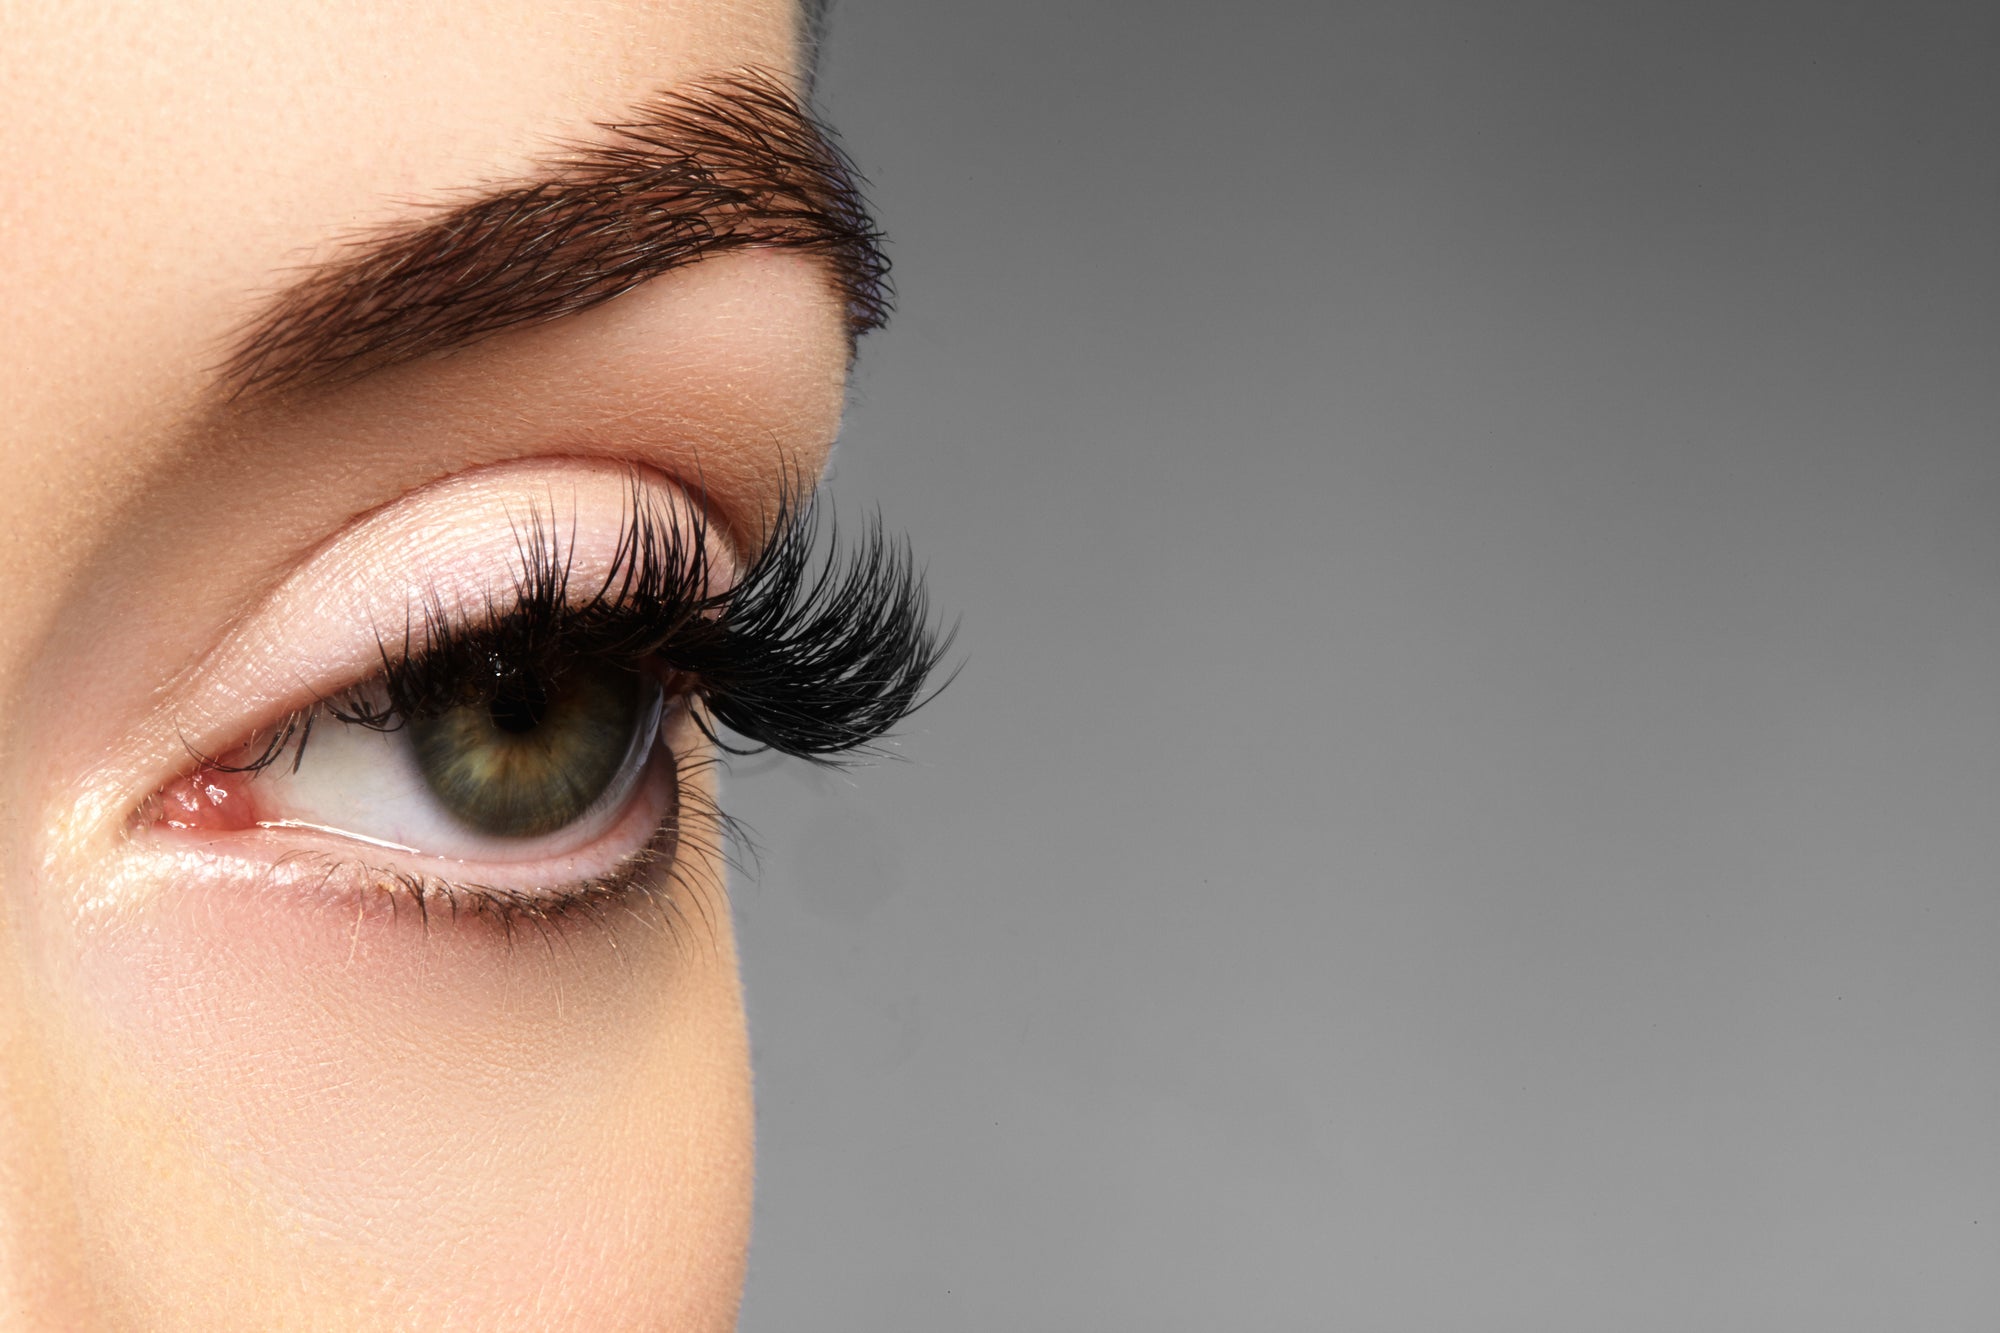 Sagging Eyelash Extensions? Discover How to Correct Them